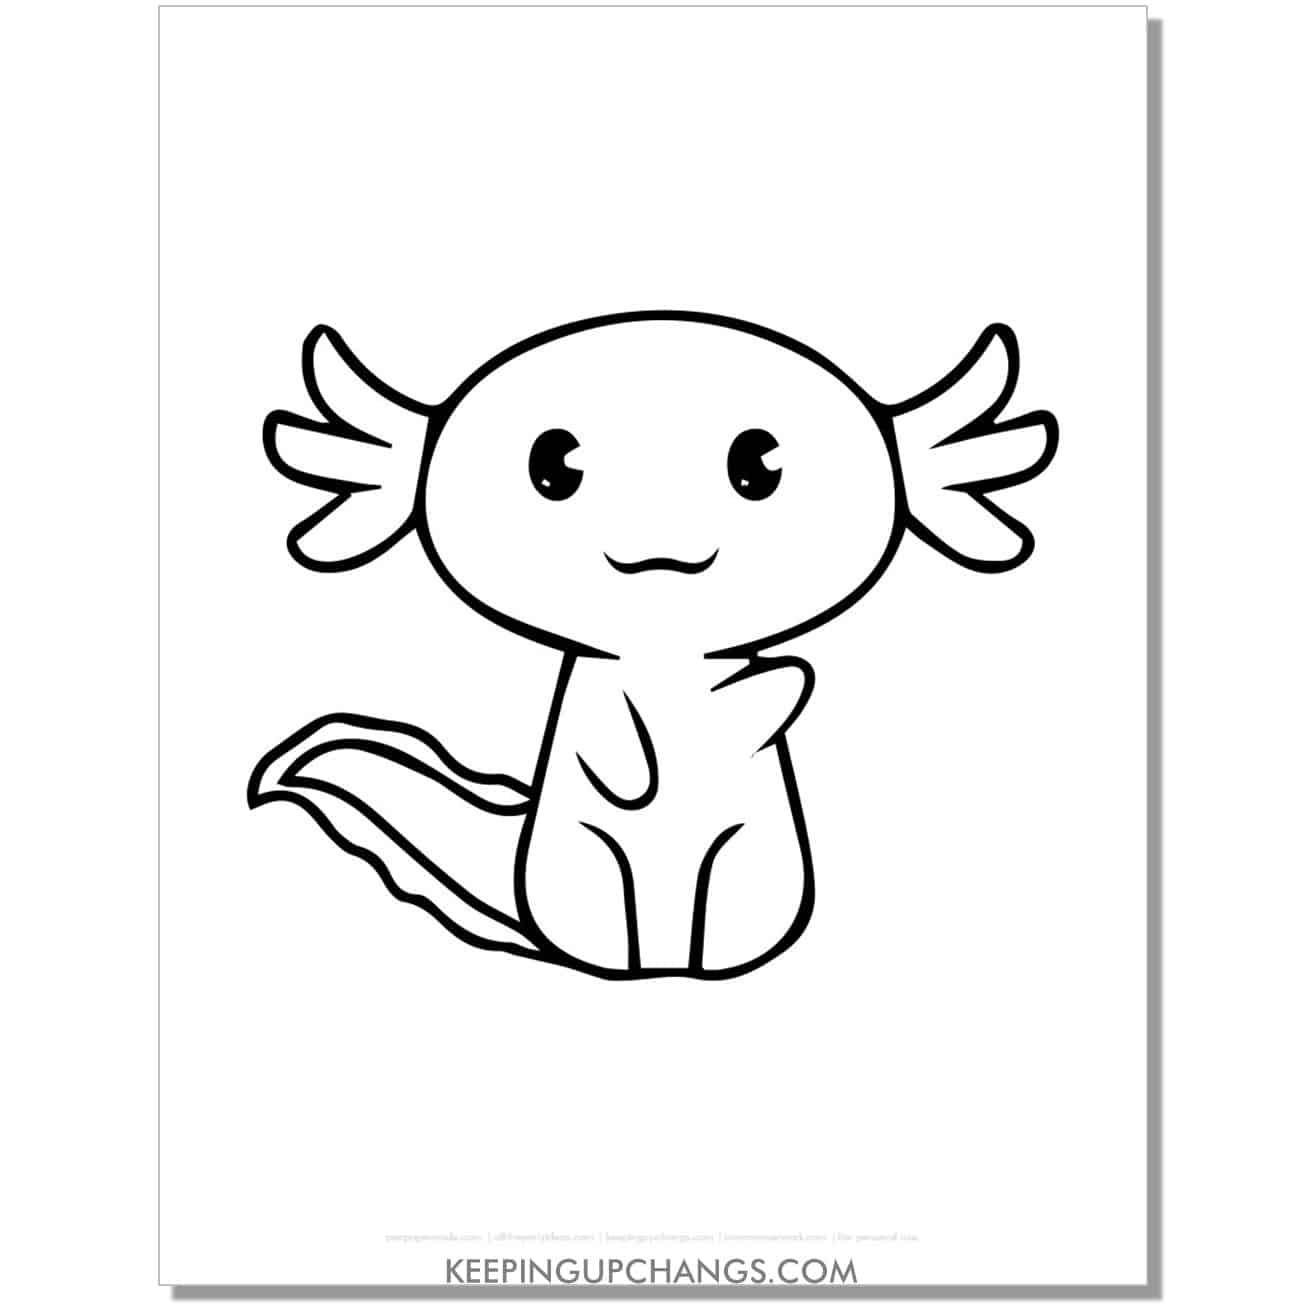 free cute axolotl sitting, waving one arm coloring page.